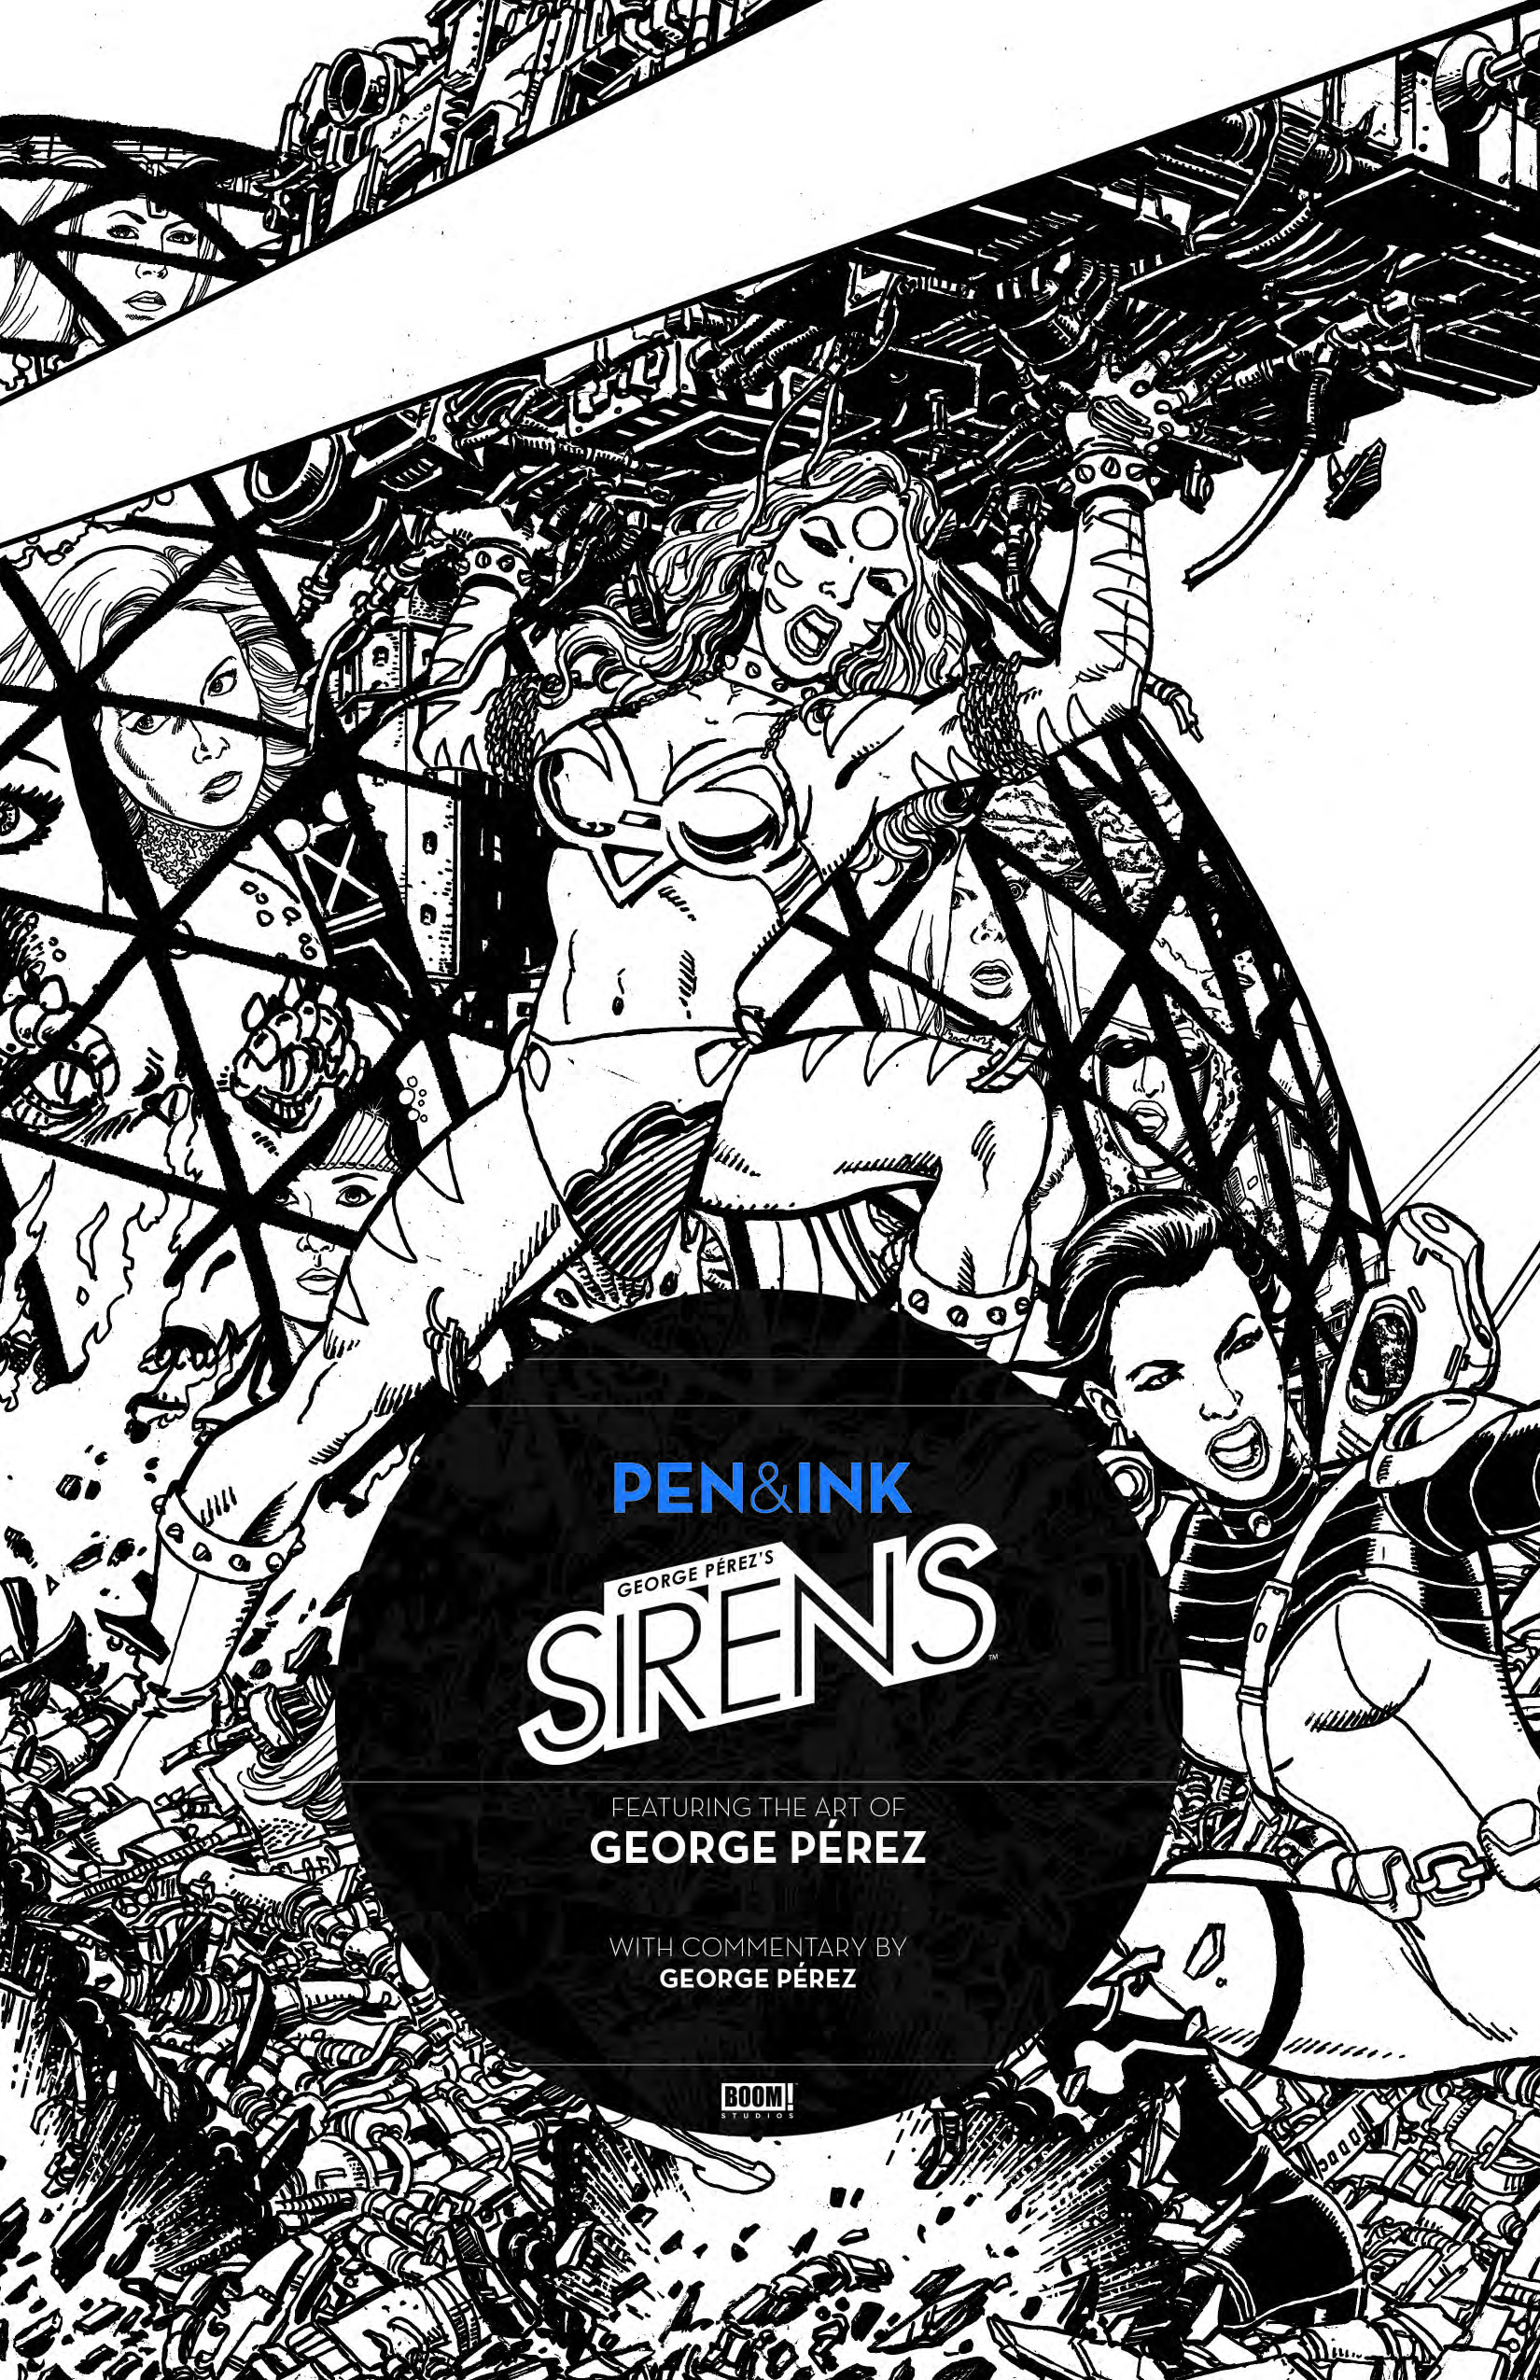 PenandInk_Sirens_001_Cover